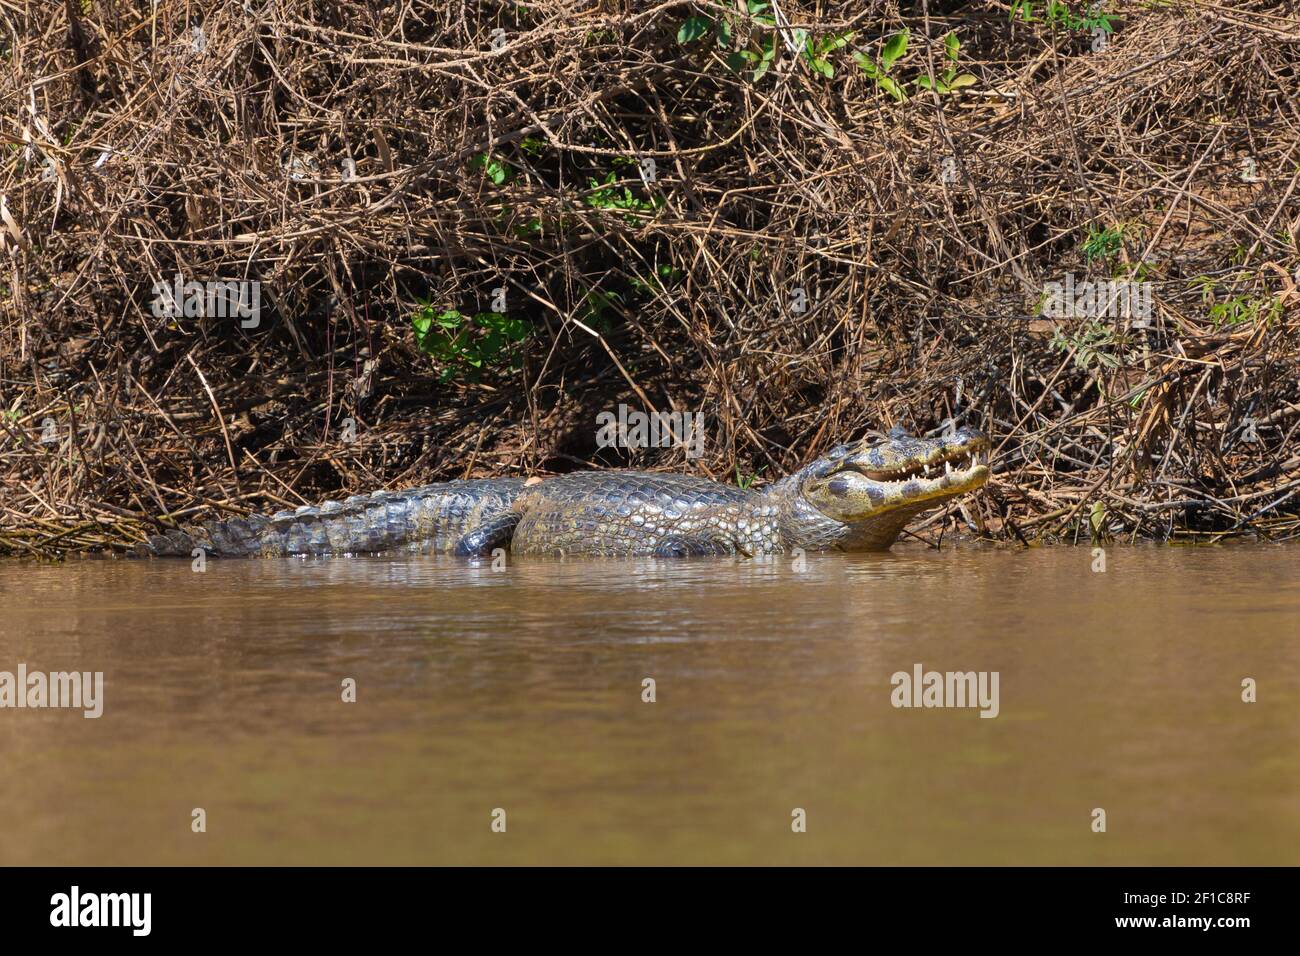 Southern Spectacled Caiman in the northern Pantanal in Mato Grosso, Brazil Stock Photo